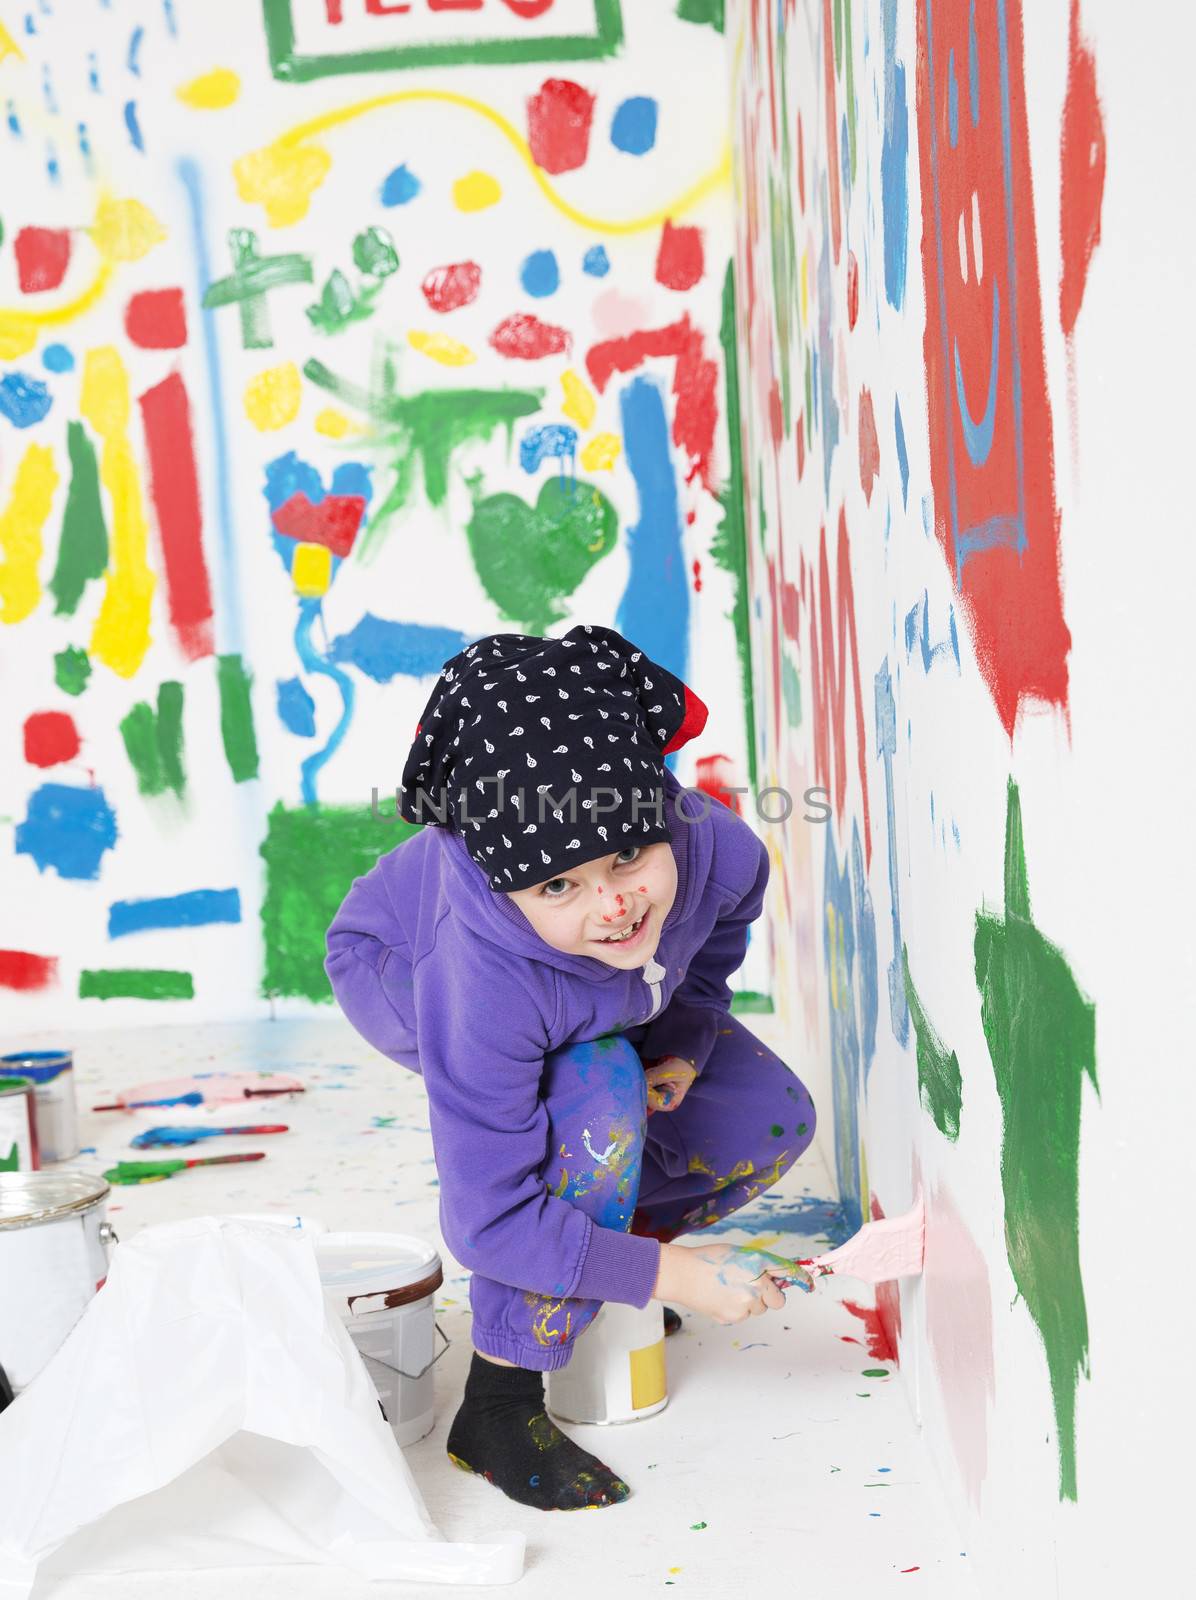 Young Artist painting with a smile on her face